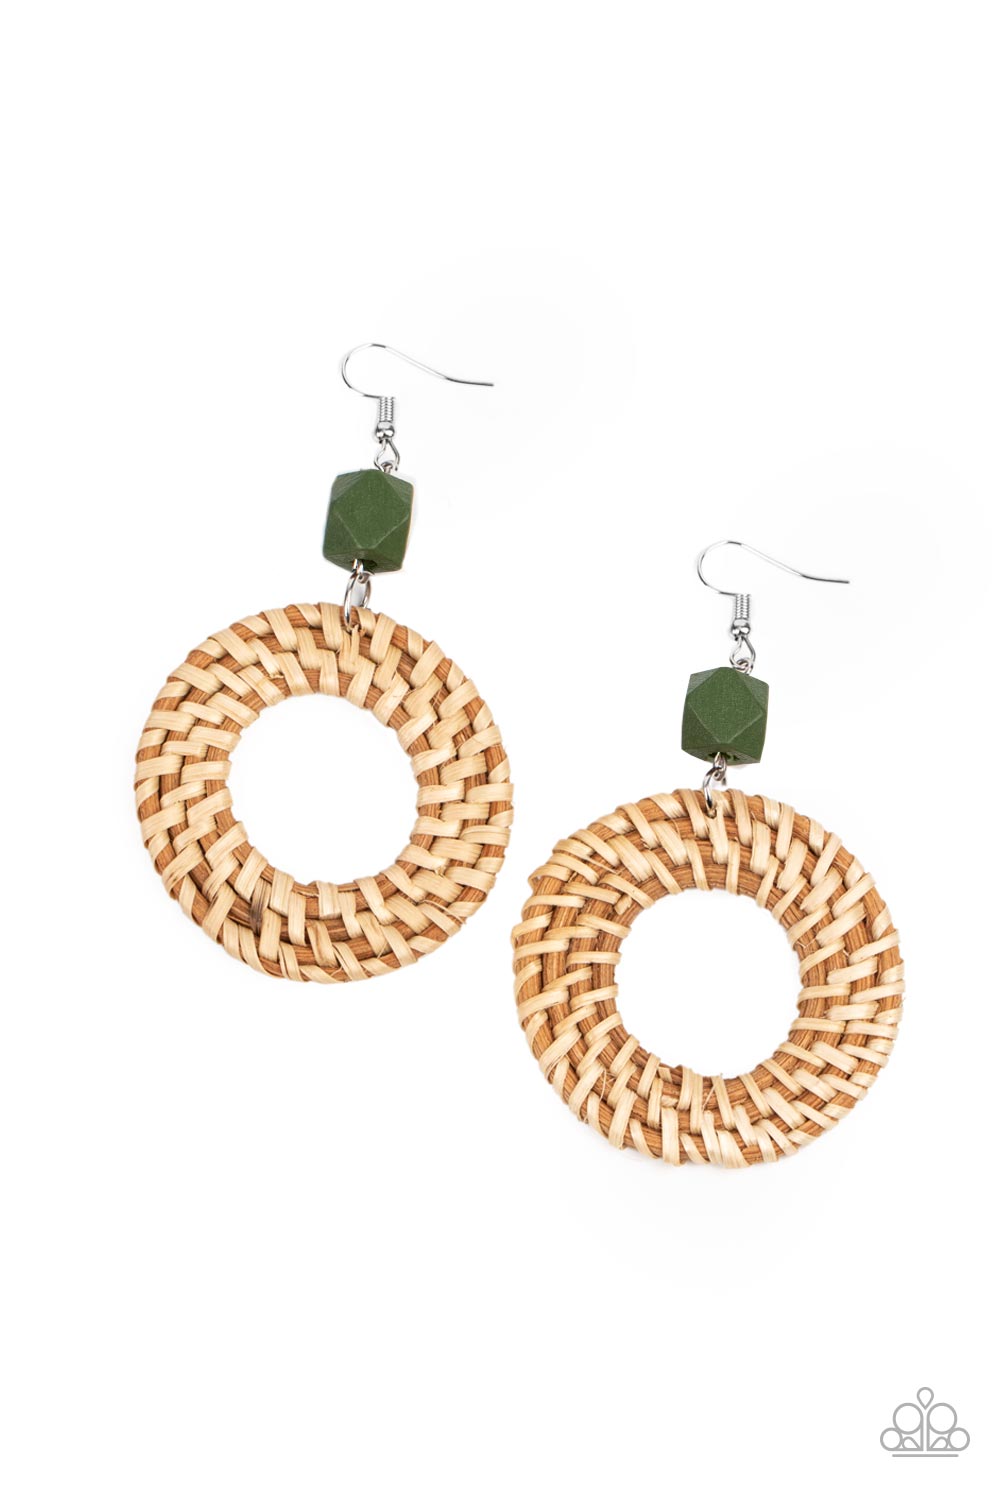 Wildly Wicker Green Wooden Earring - Paparazzi Accessories  A wicker-like hoop swings from the bottom of a faceted Olive Branch wooden bead, adding an earthy twist to the trendy homespun trinket. Earring attaches to a standard fishhook fitting.  Sold as one pair of earrings.